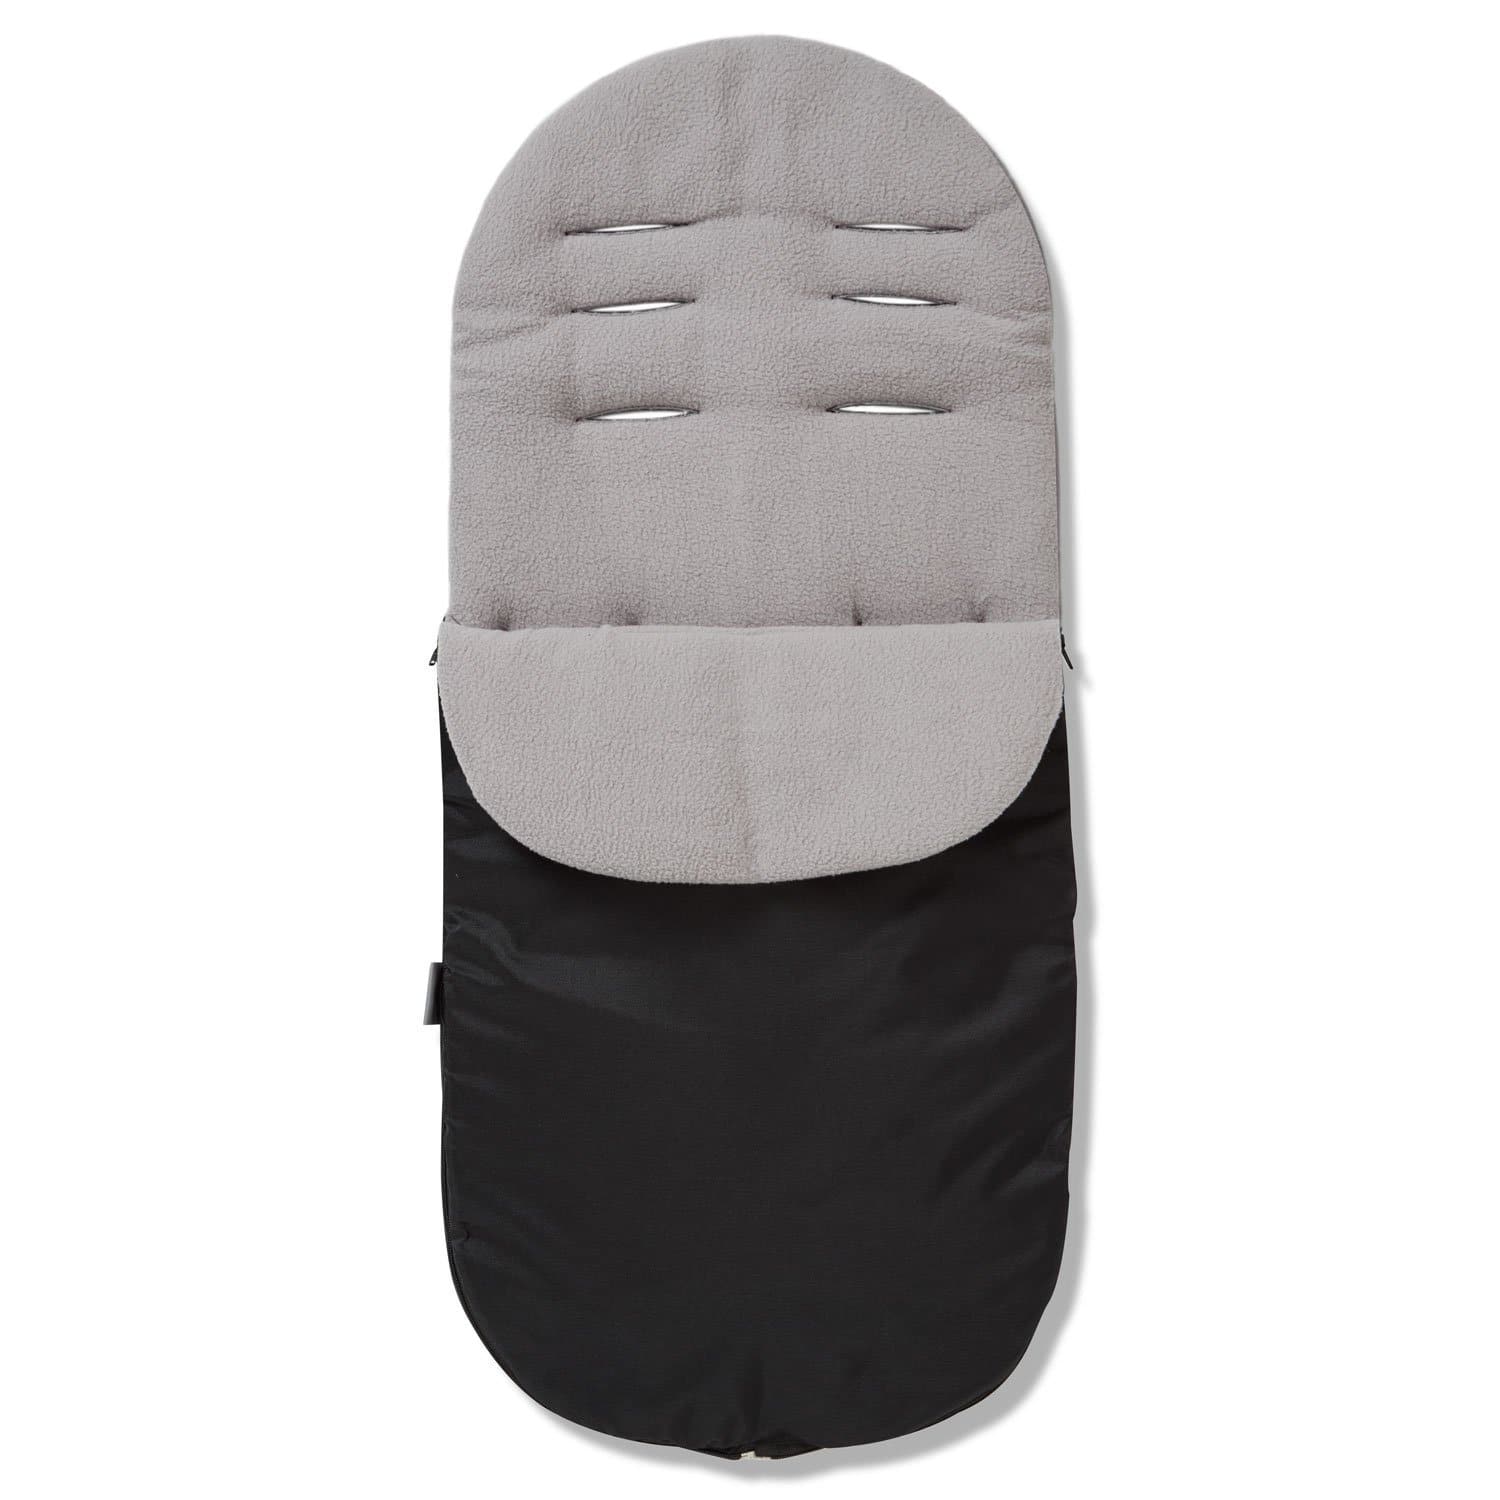 Footmuff / Cosy Toes Compatible with Teutonia - Grey / Fits All Models | For Your Little One